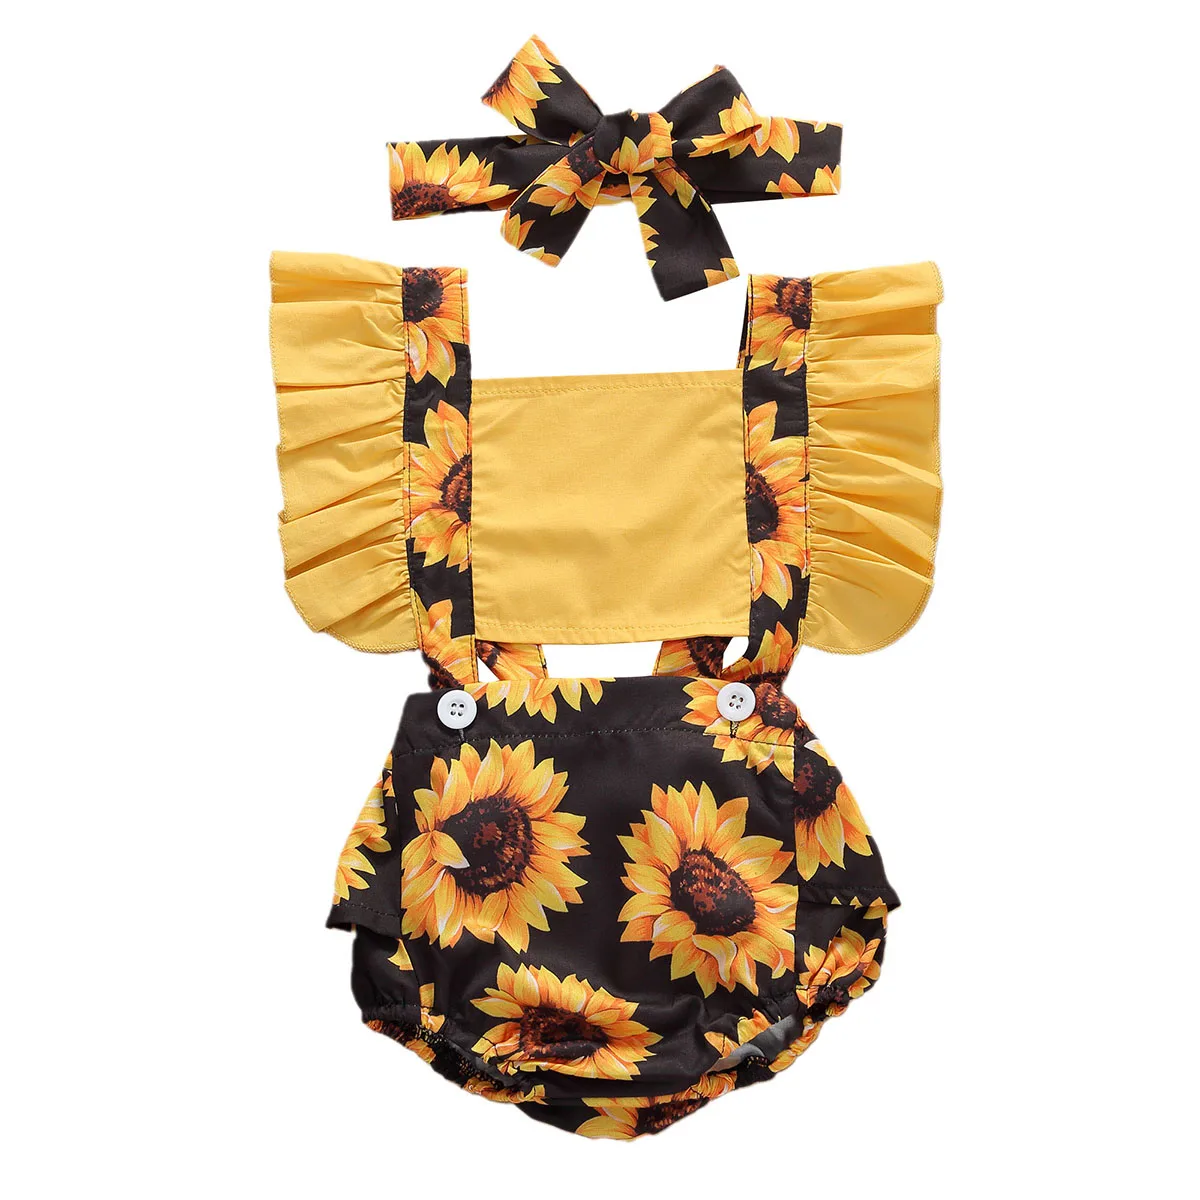 

Summer Baby Girls Clothes Sunflower Patchwork Ruffled Sleeve Jumpsuit Sleeveless Playsuit Outfits Headband 2Pcs Set for 0-24M